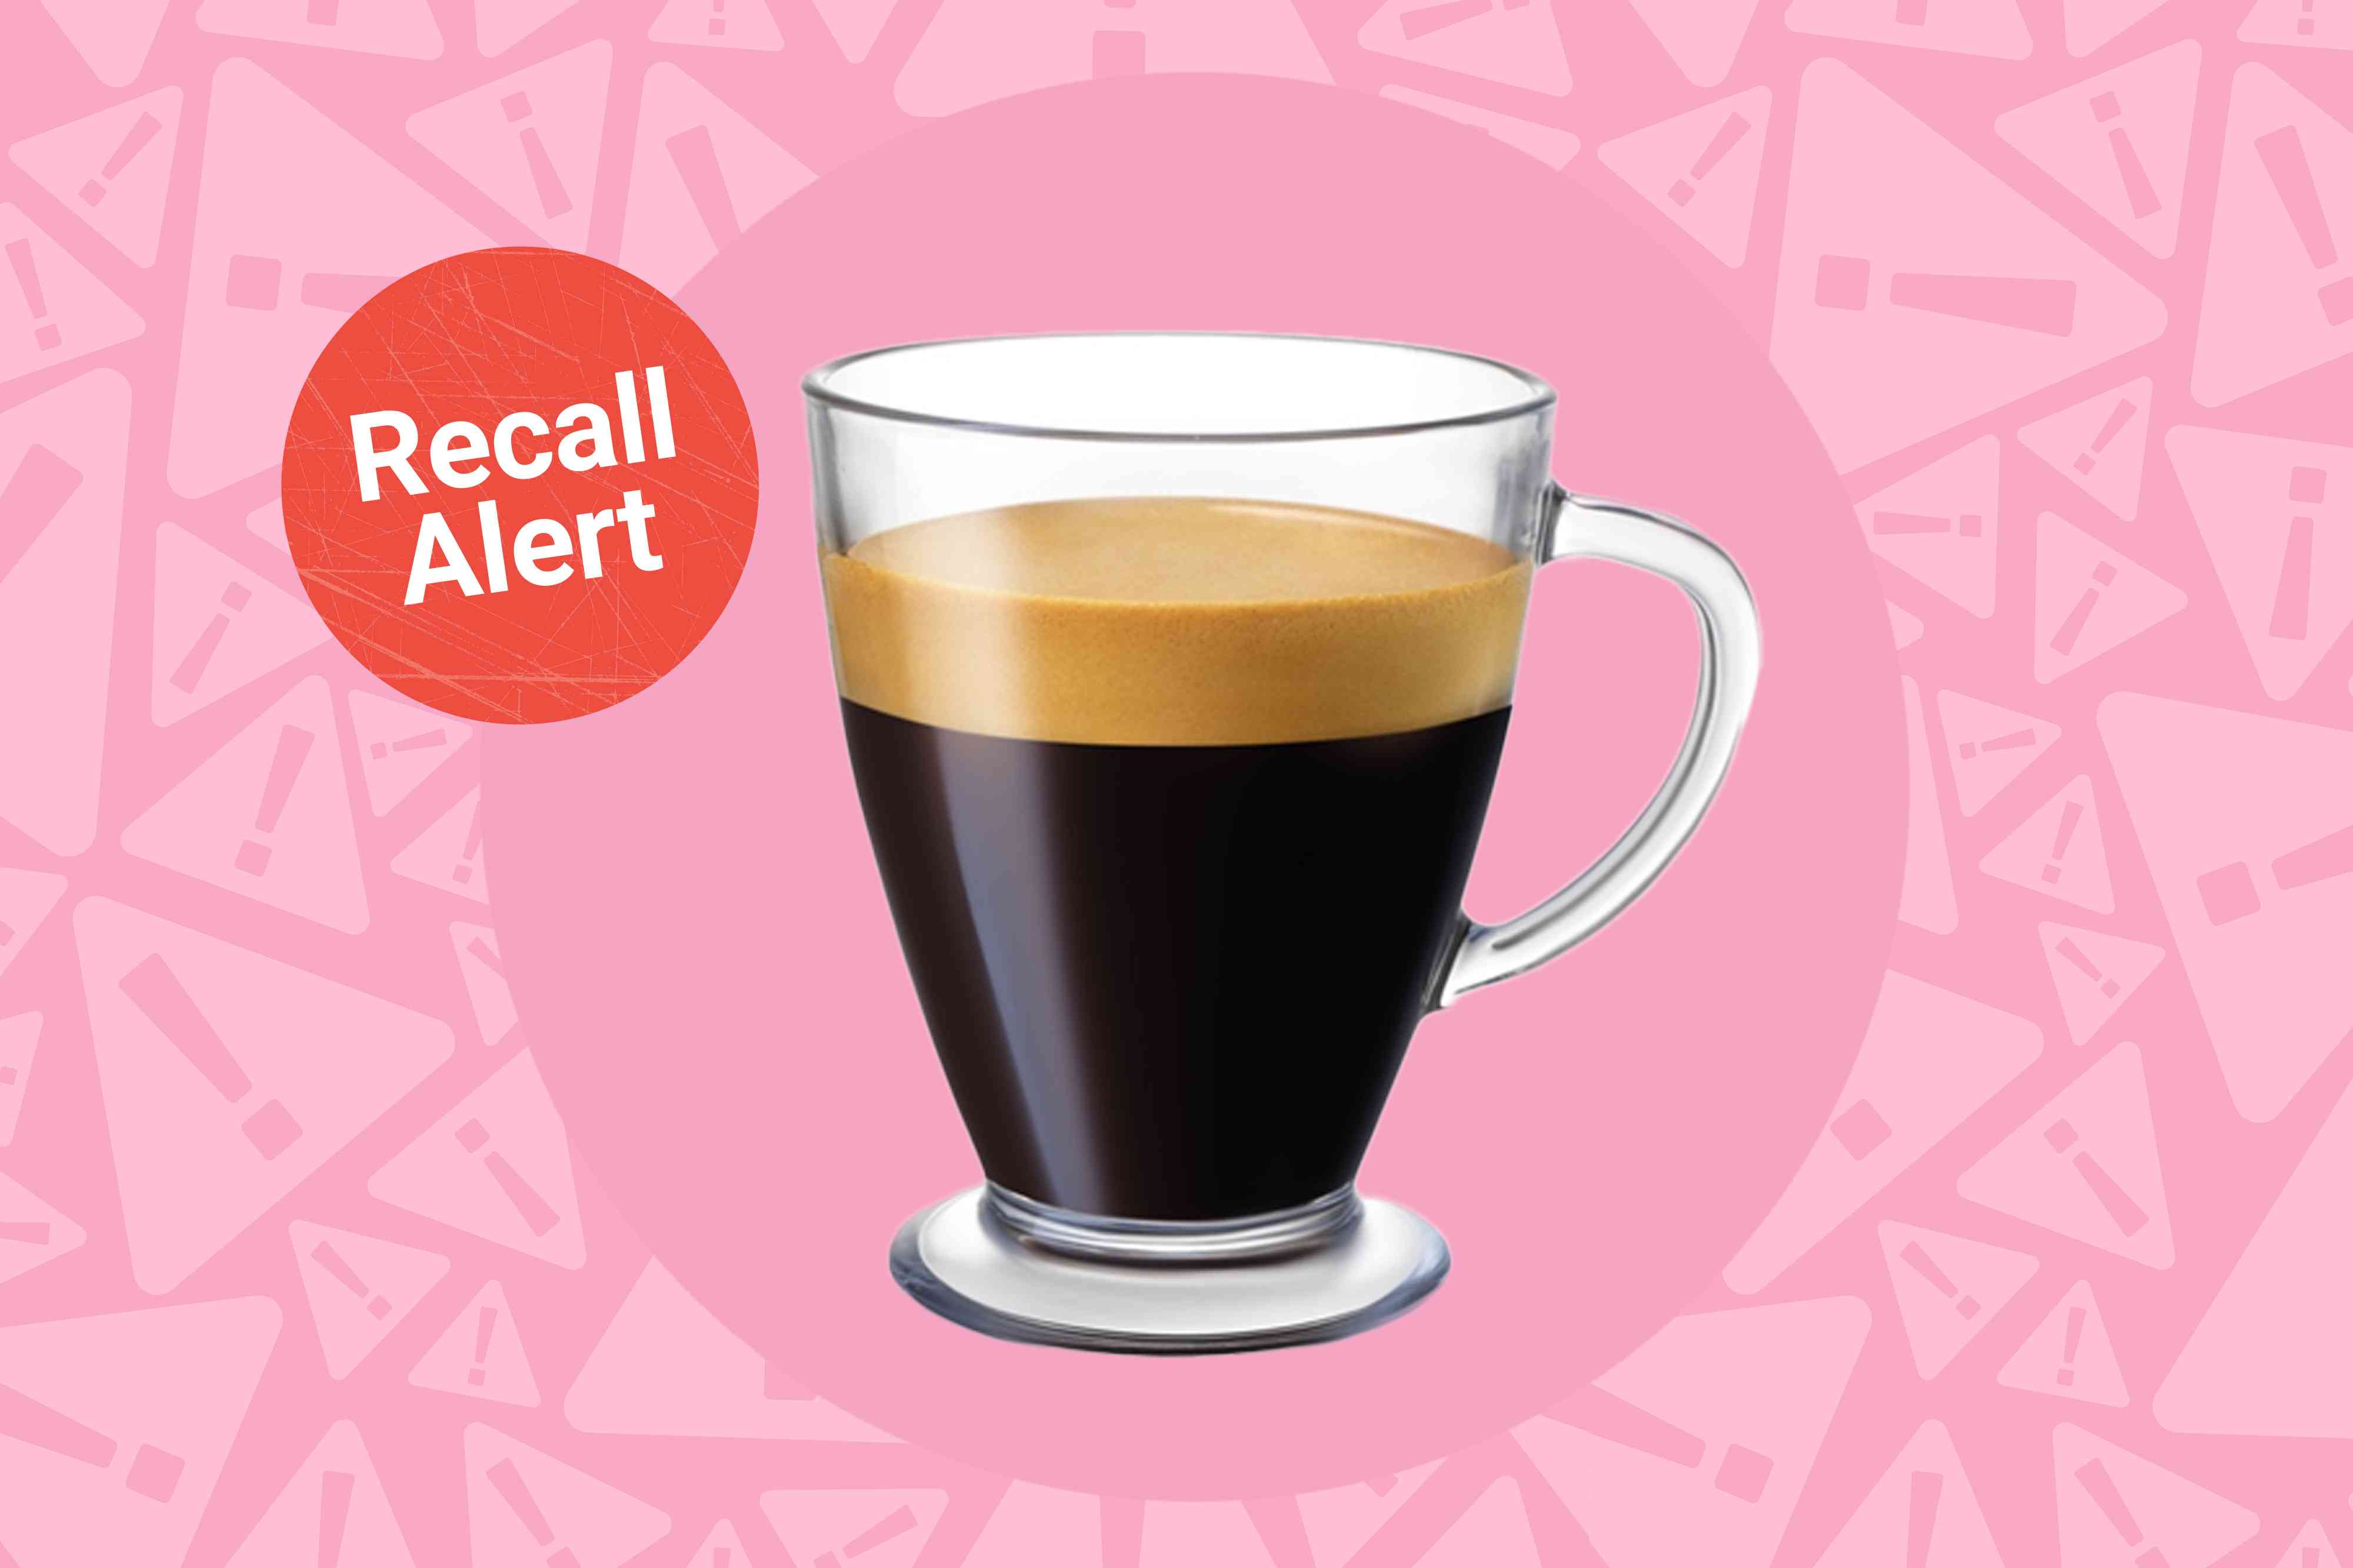 Over 550,000 Glass Coffee Mugs Recalled Due to Burn and Laceration Risk